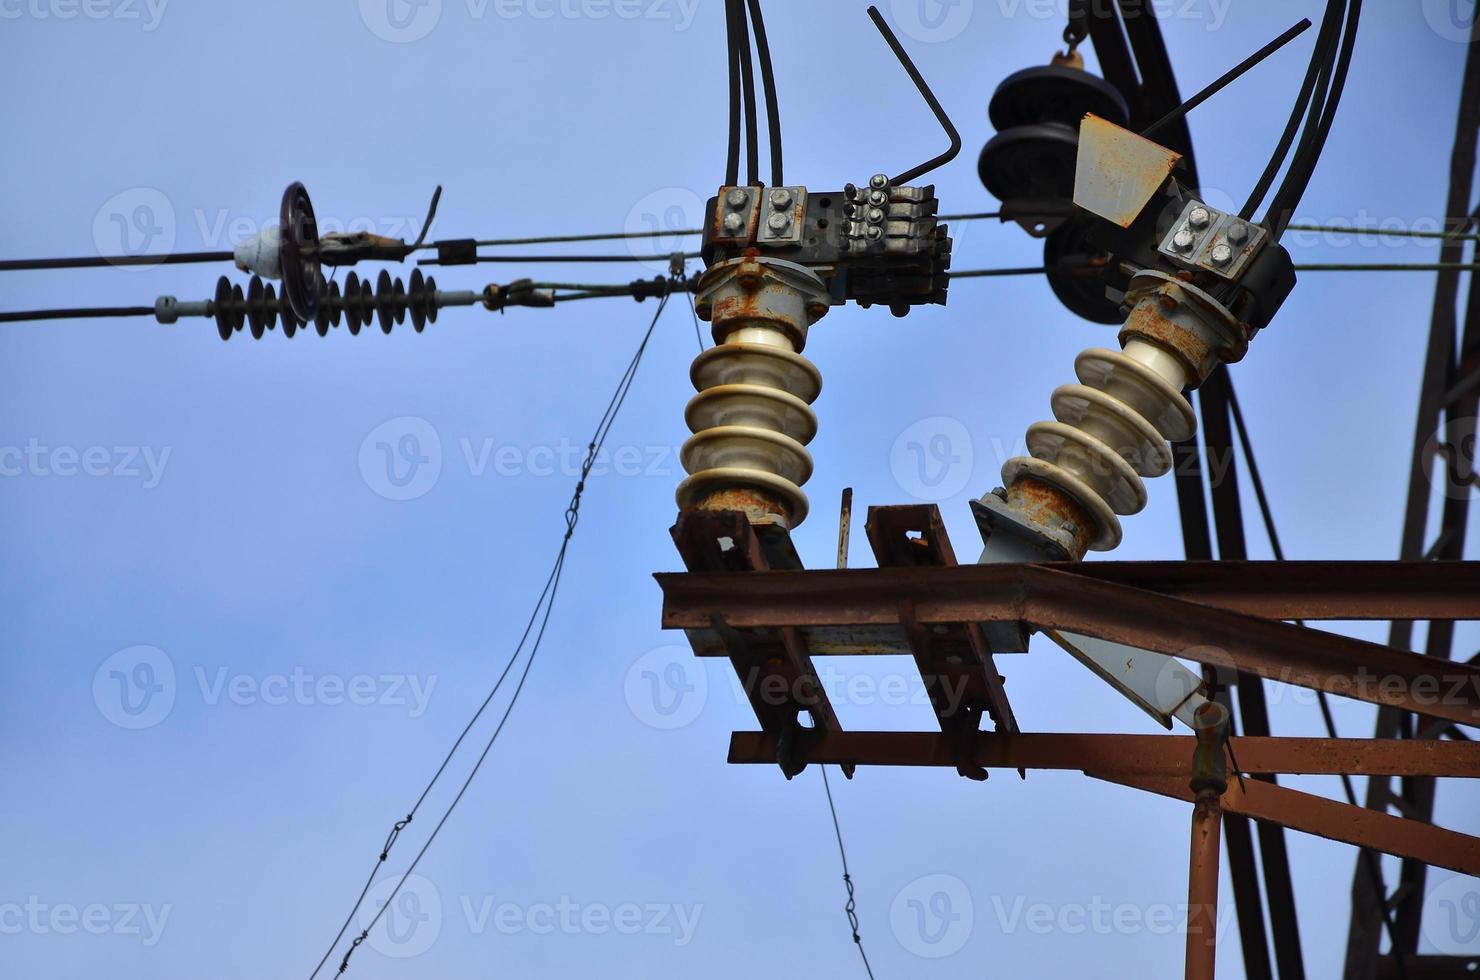 Some details from a high voltage post photo